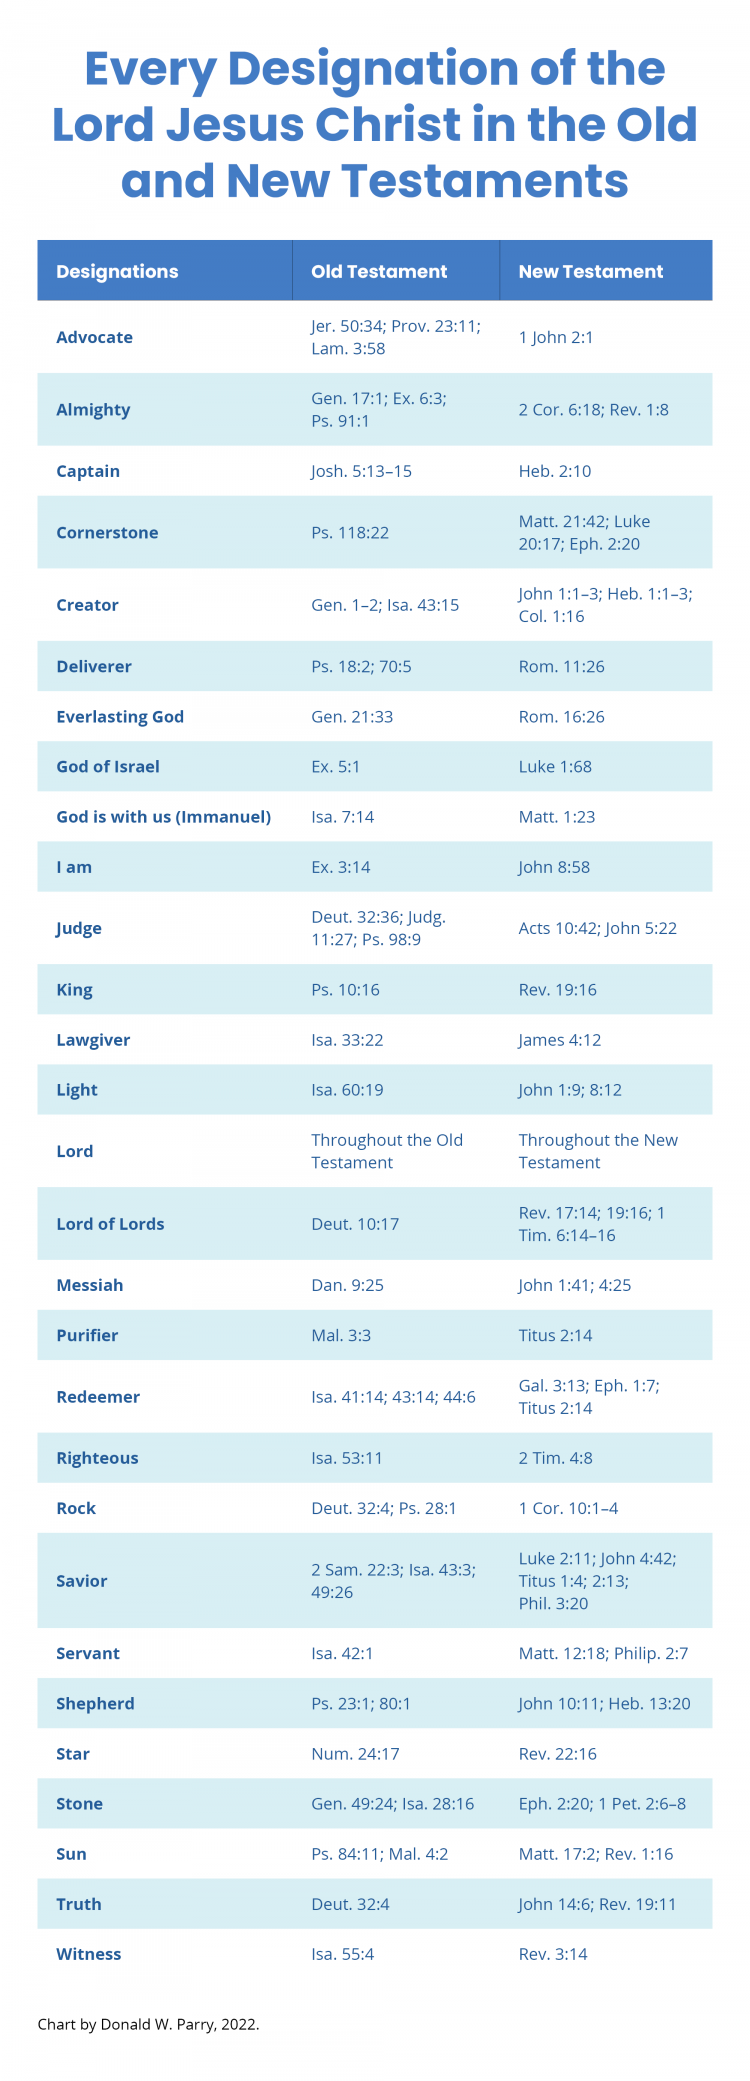 Chart by Donald W. Parry. Every Designation of the Lord Jesus Christ in the Old and New Testaments.